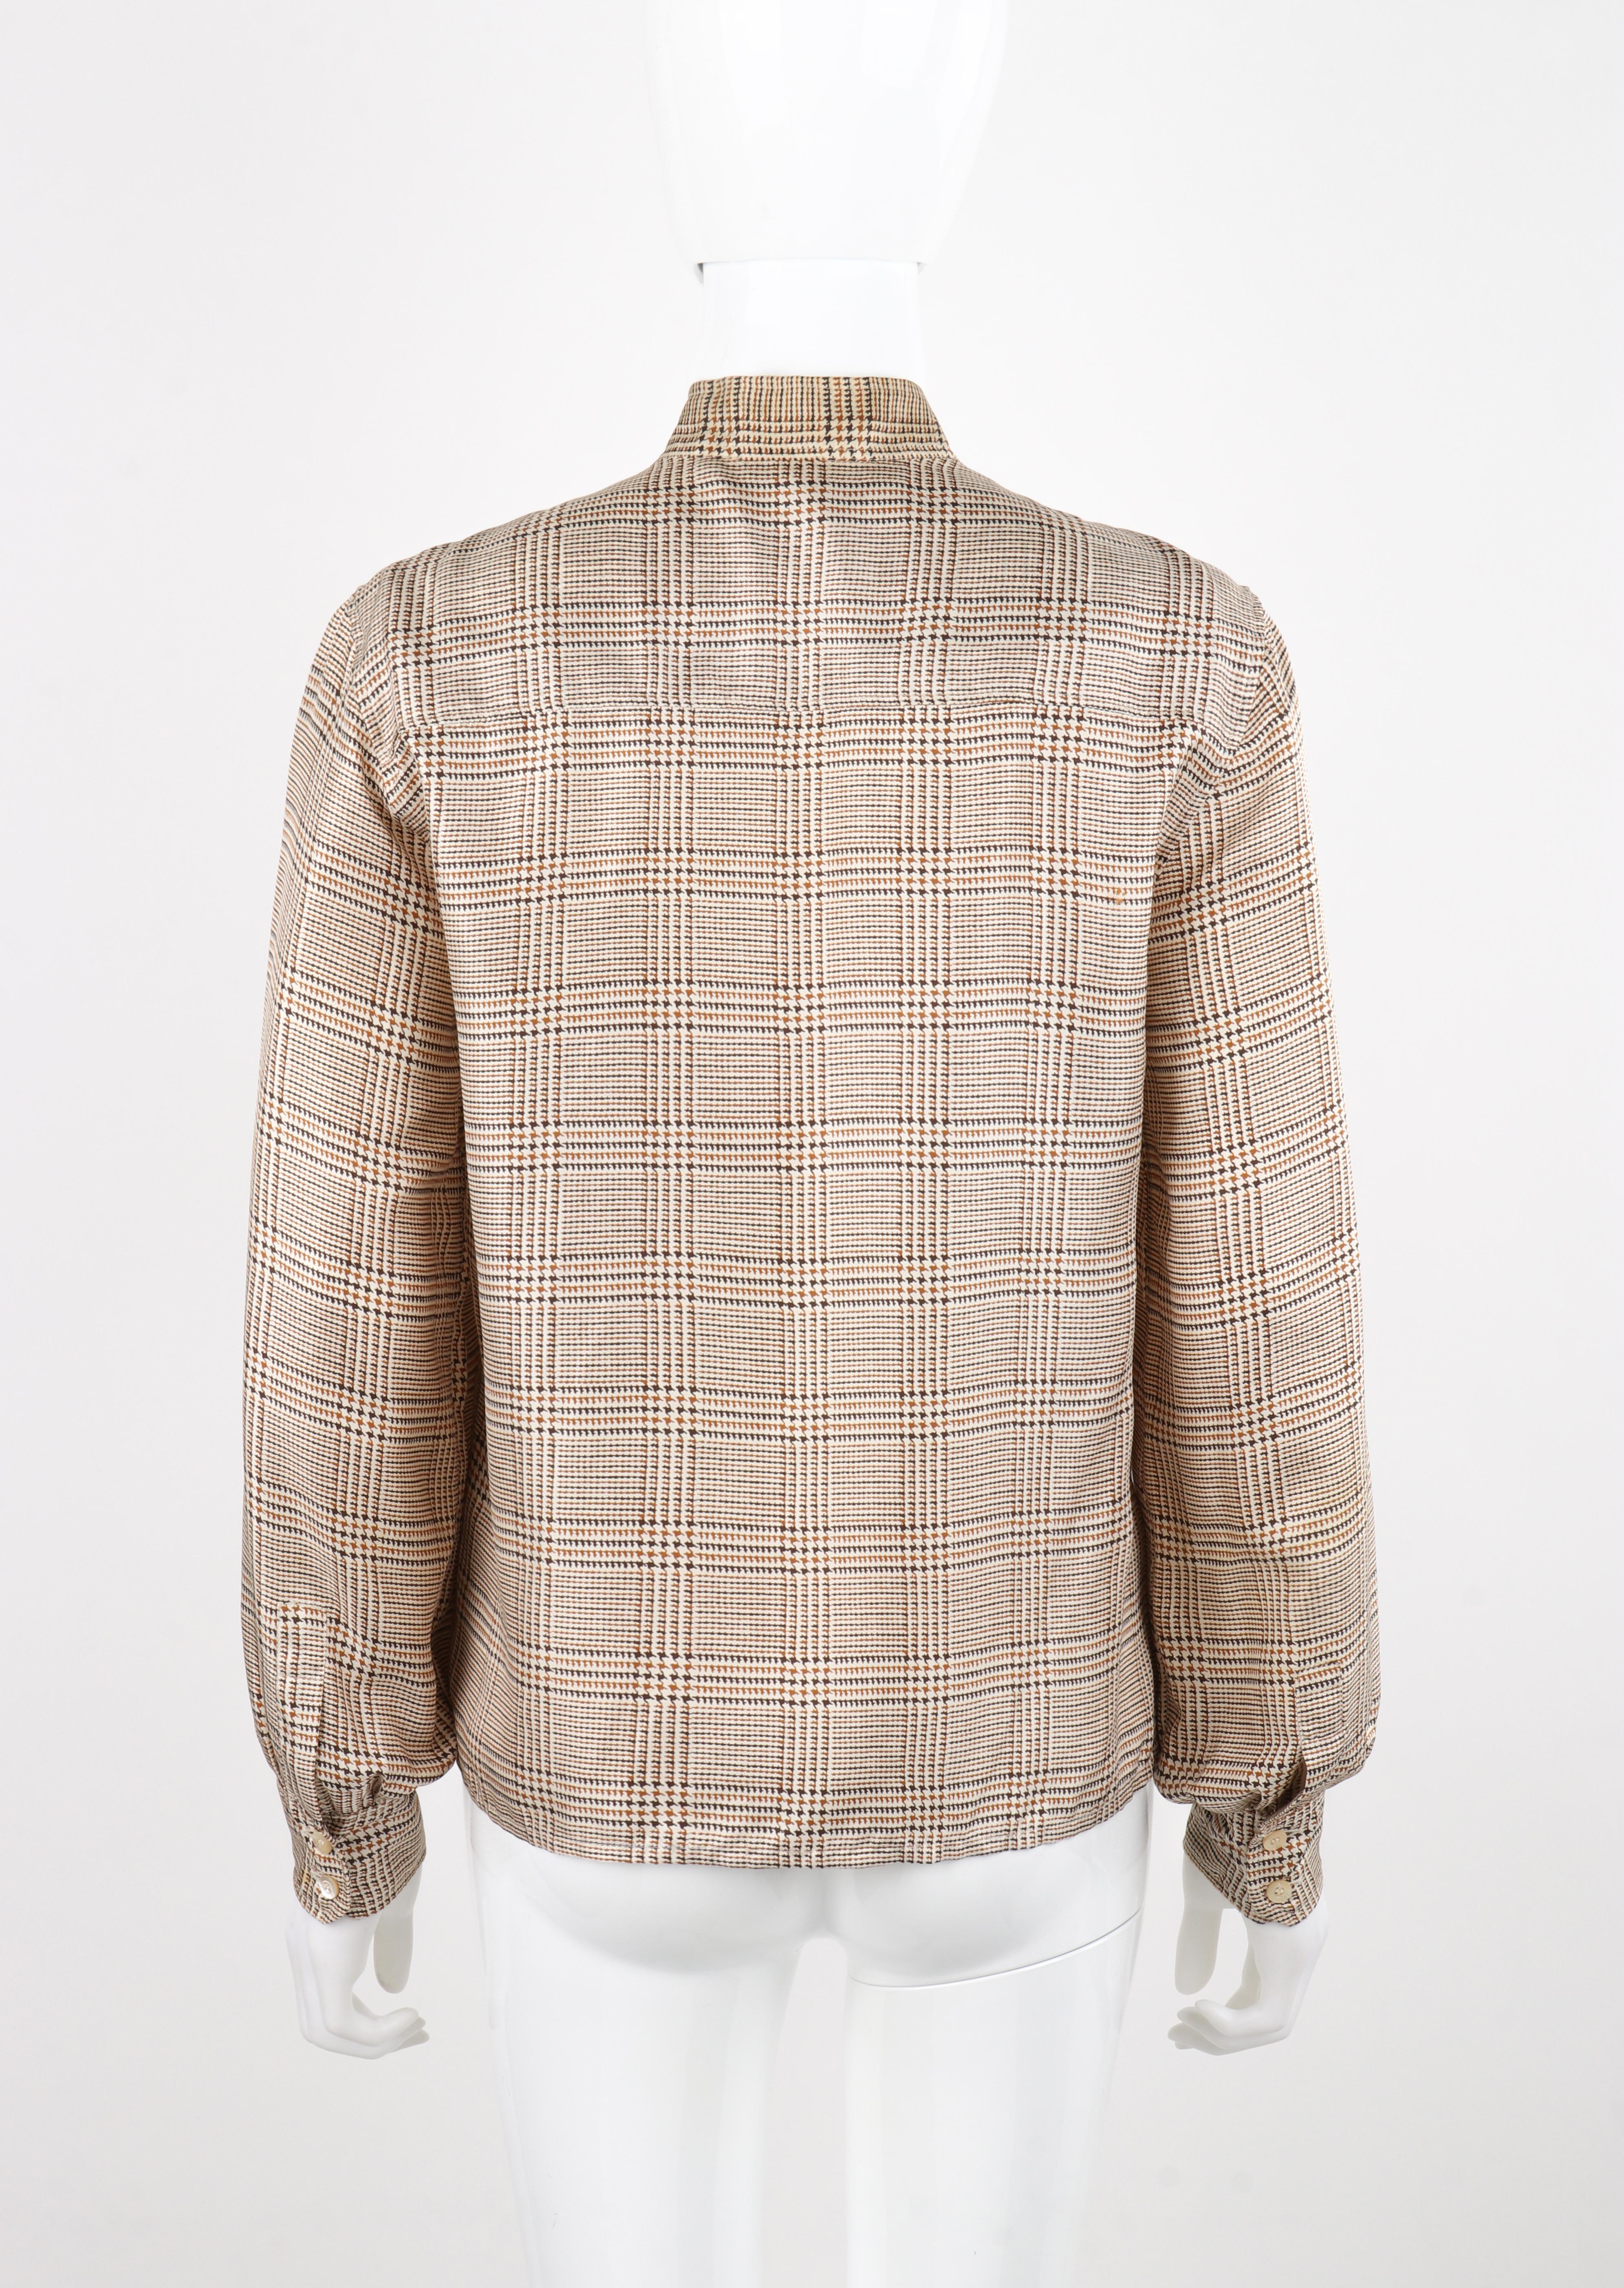 Celine c.1970 Brown Tan Silk Houndstooth Pussybow Button Up Blouse Top en vente 2